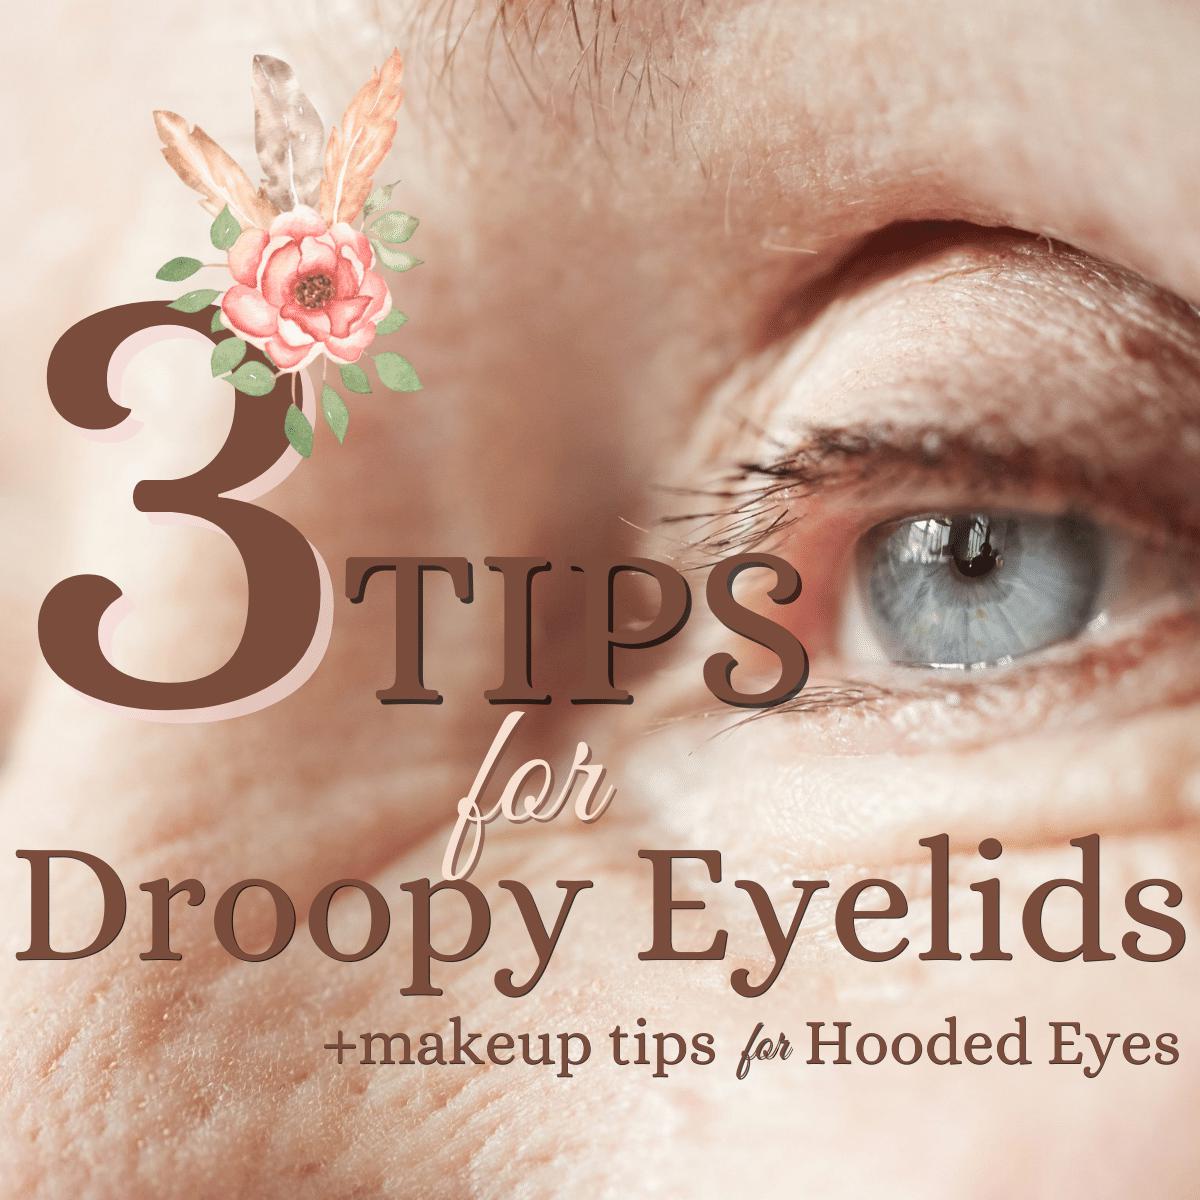 Droopy Eyes + Makeup Tips